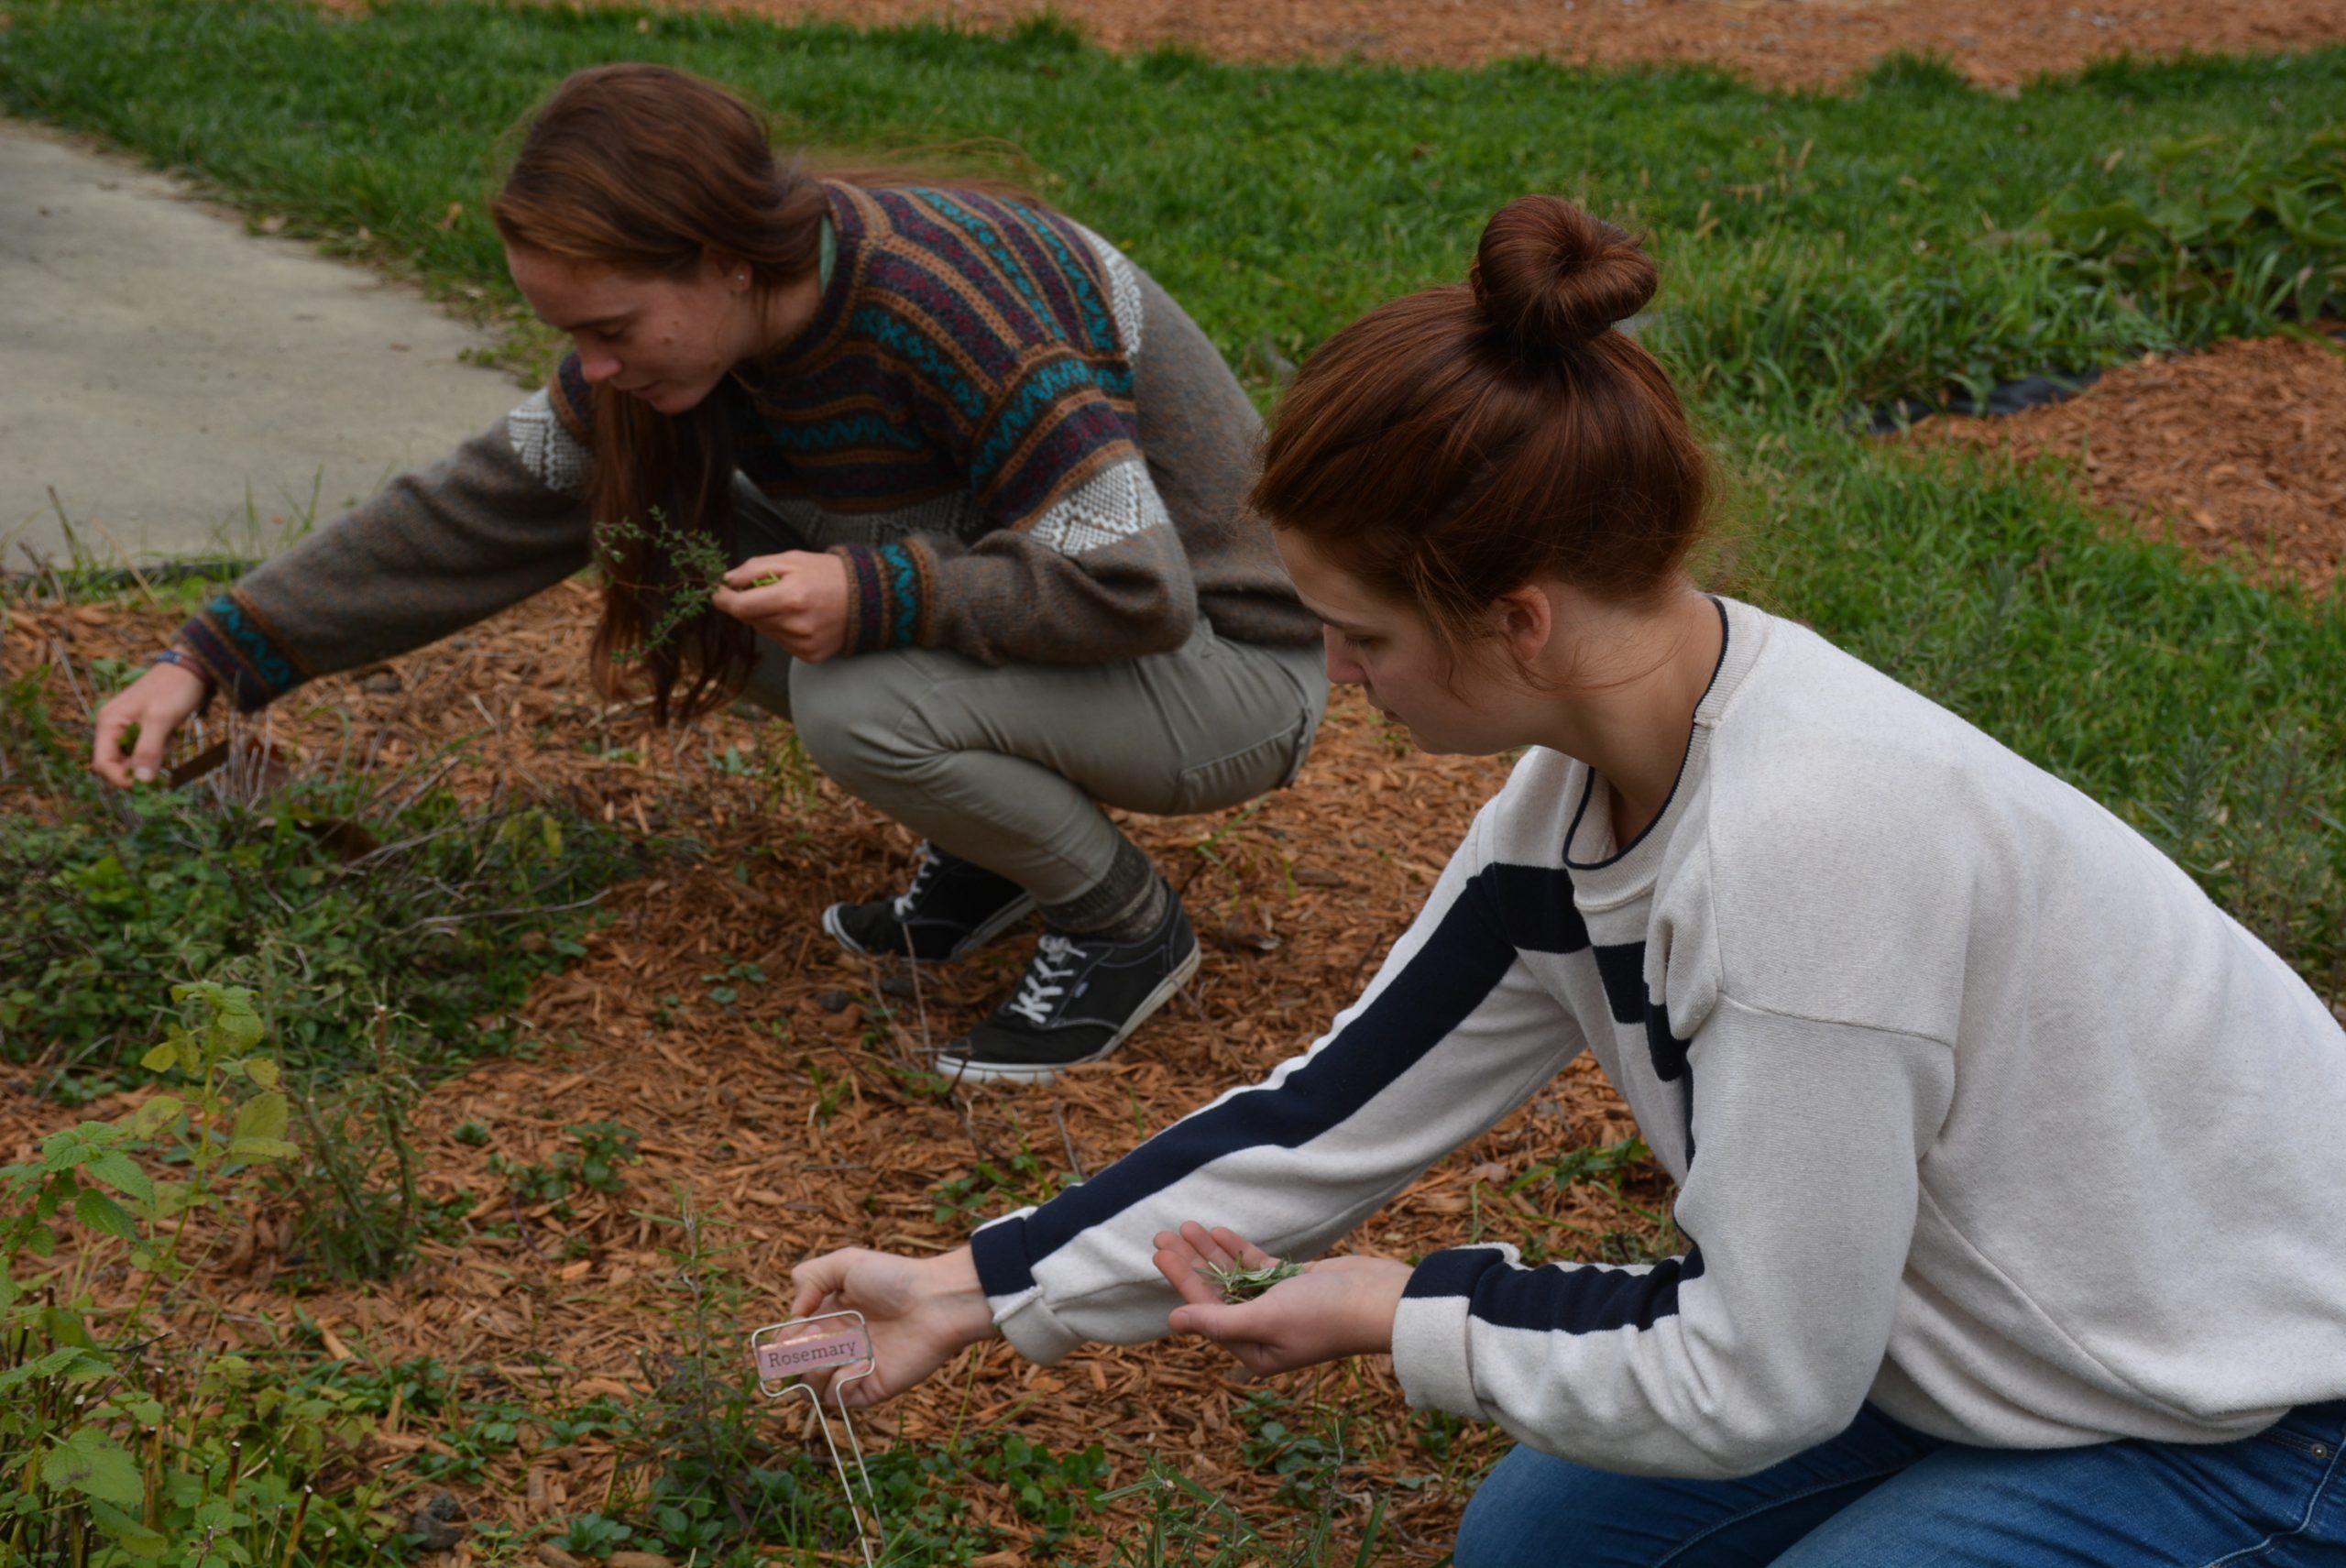 Emma and fellow SLS student, Sierra Ross Richer, pick herbs from the garden at Rieth Village. The SLS students interacted as a family group during the pandemic and wore face masks and physically distanced when interacting with people outside their cohort.